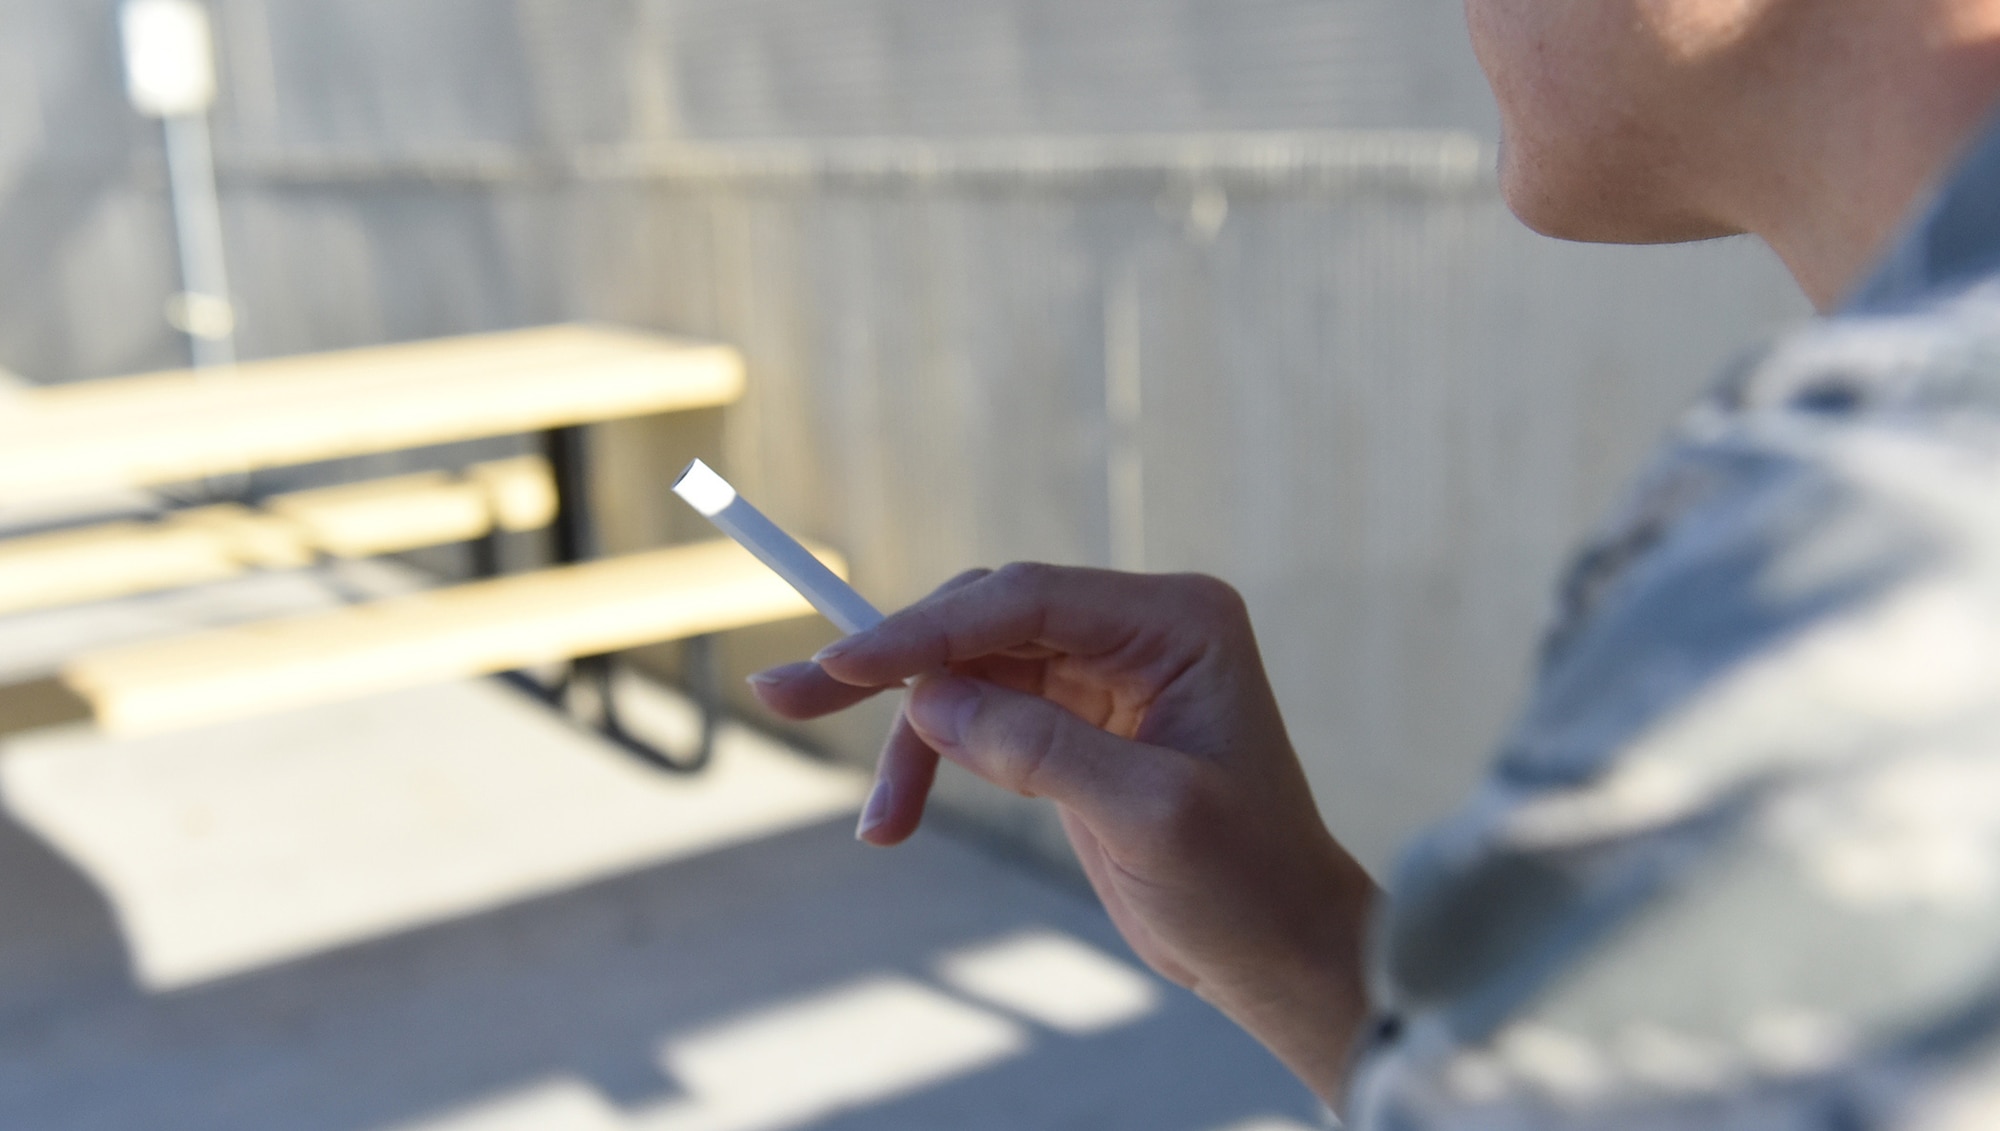 An Airman contemplates lighting up a cigarette as a coping mechanism against stress.  The Malmstrom Health Clinic has a tobacco cessation program that offers alternate methods to help cope with stress as well as reducing the urge in using tobacco.  